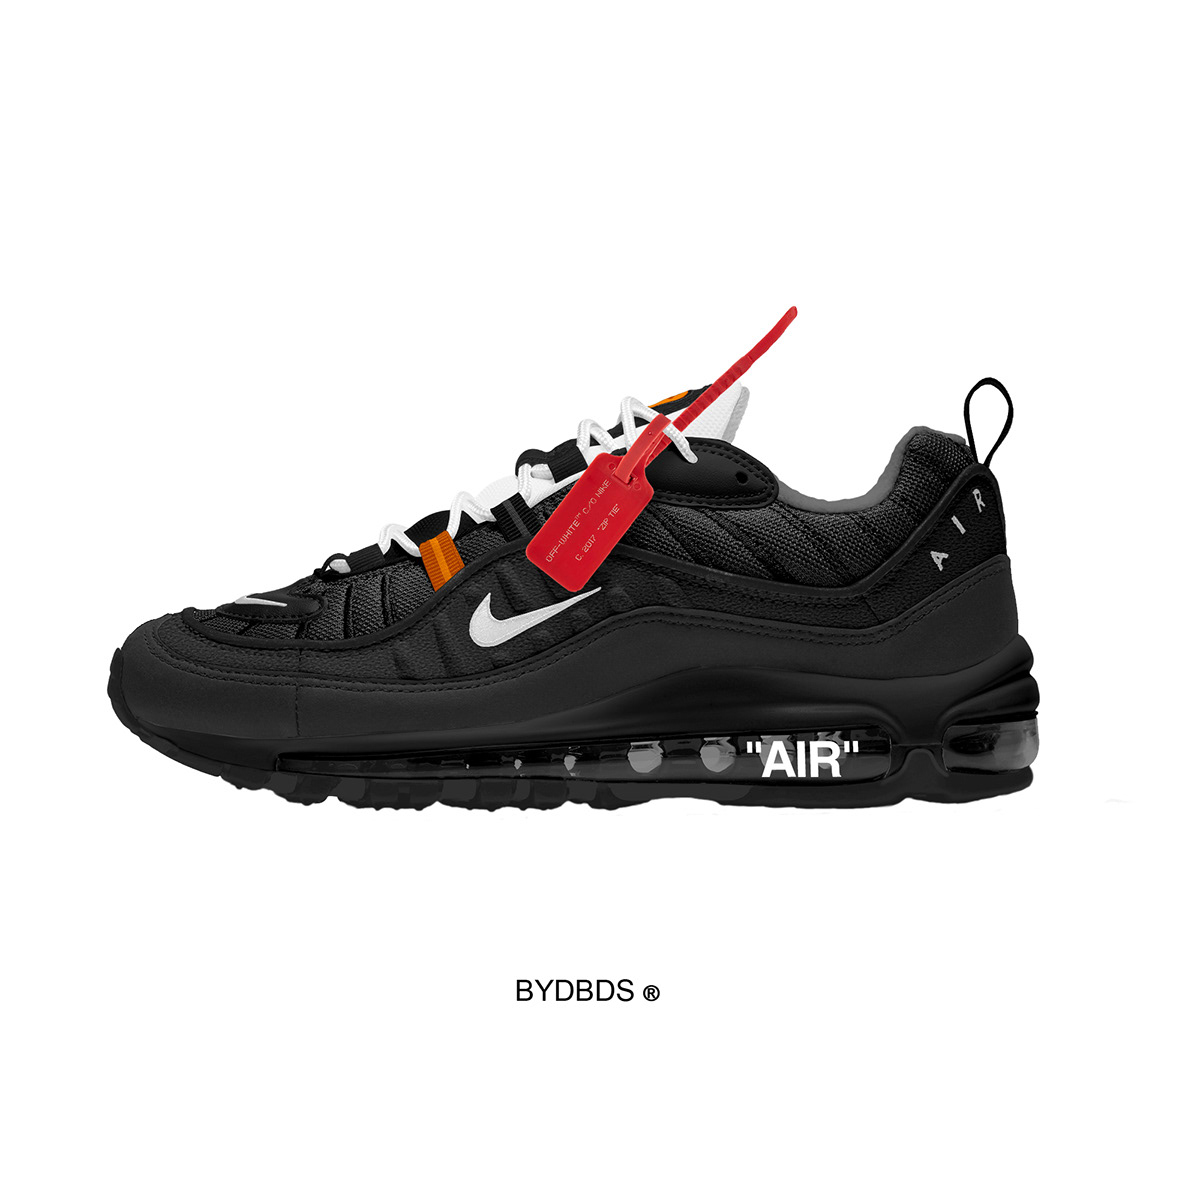 trommel wees onder de indruk barbecue Nike Air Max 98 x Off-White ™ Vlone Concepts by DBDS on Behance